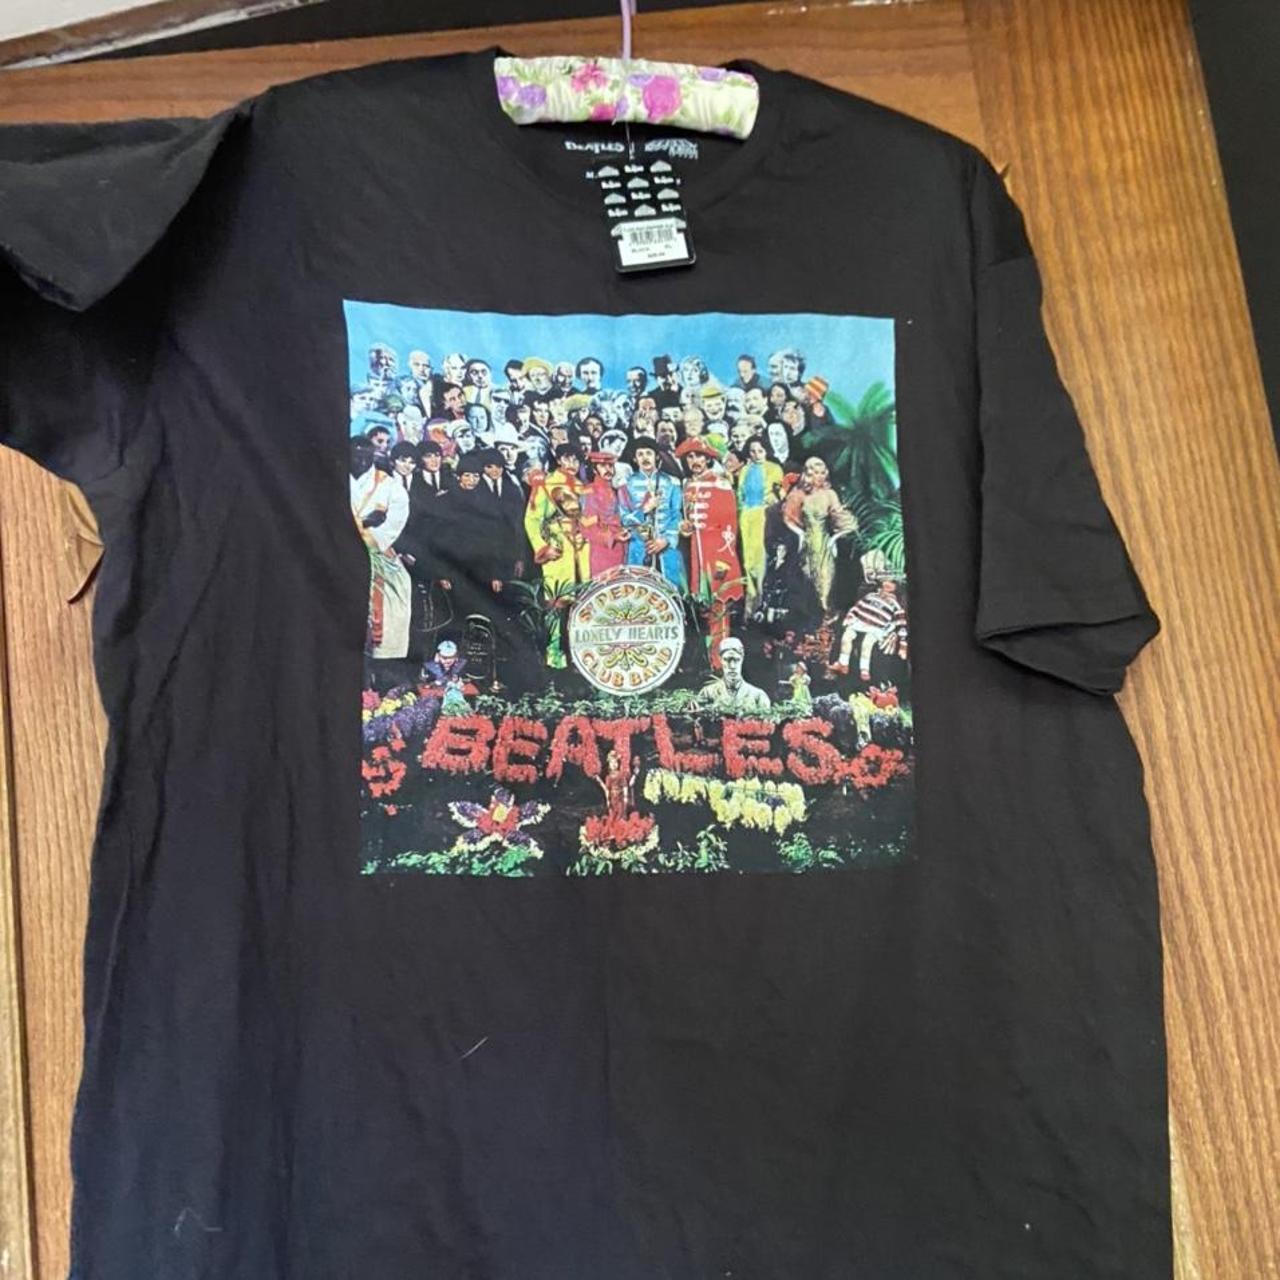 Product Image 1 - THE BEATLES SGT PEPPER SHIRT

🍁AWAY